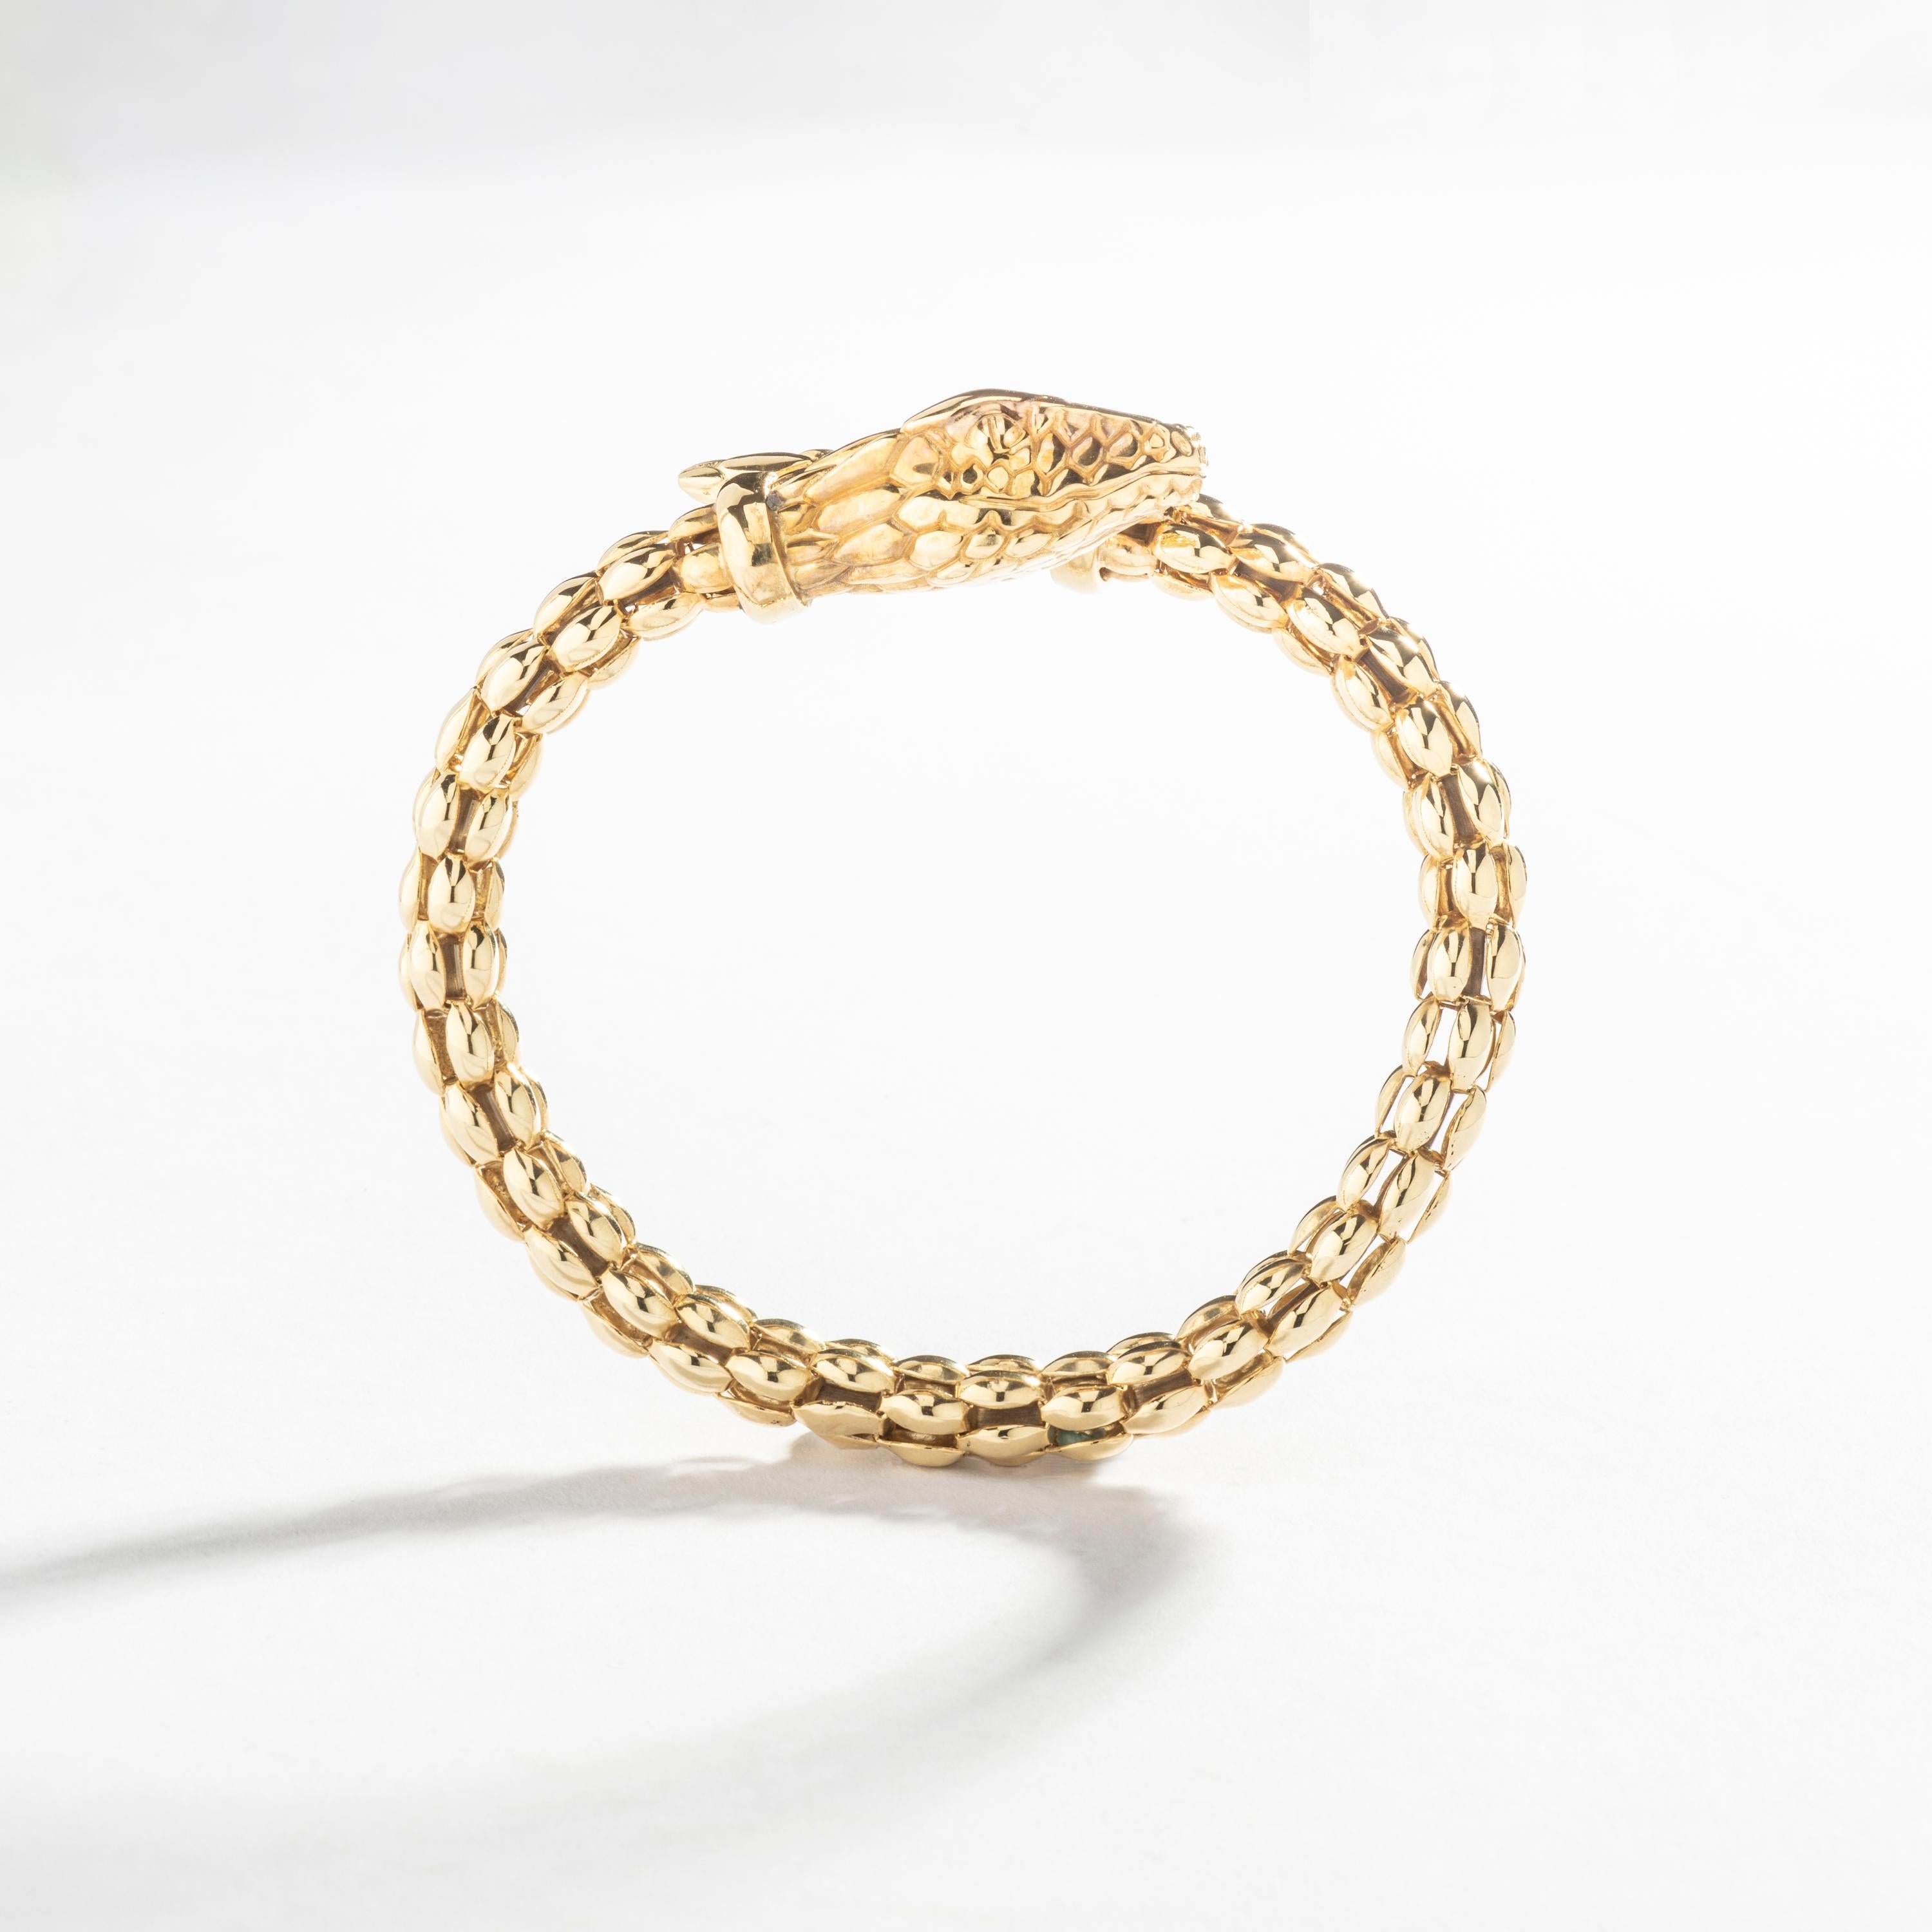 The Snake Yellow Gold 18k Bracelet is a truly exquisite piece crafted in Italy around 1980.

Made from luxurious 18k yellow gold, this bracelet features a unique and intricate snake motif design that is both elegant and timeless. Aadaptable and